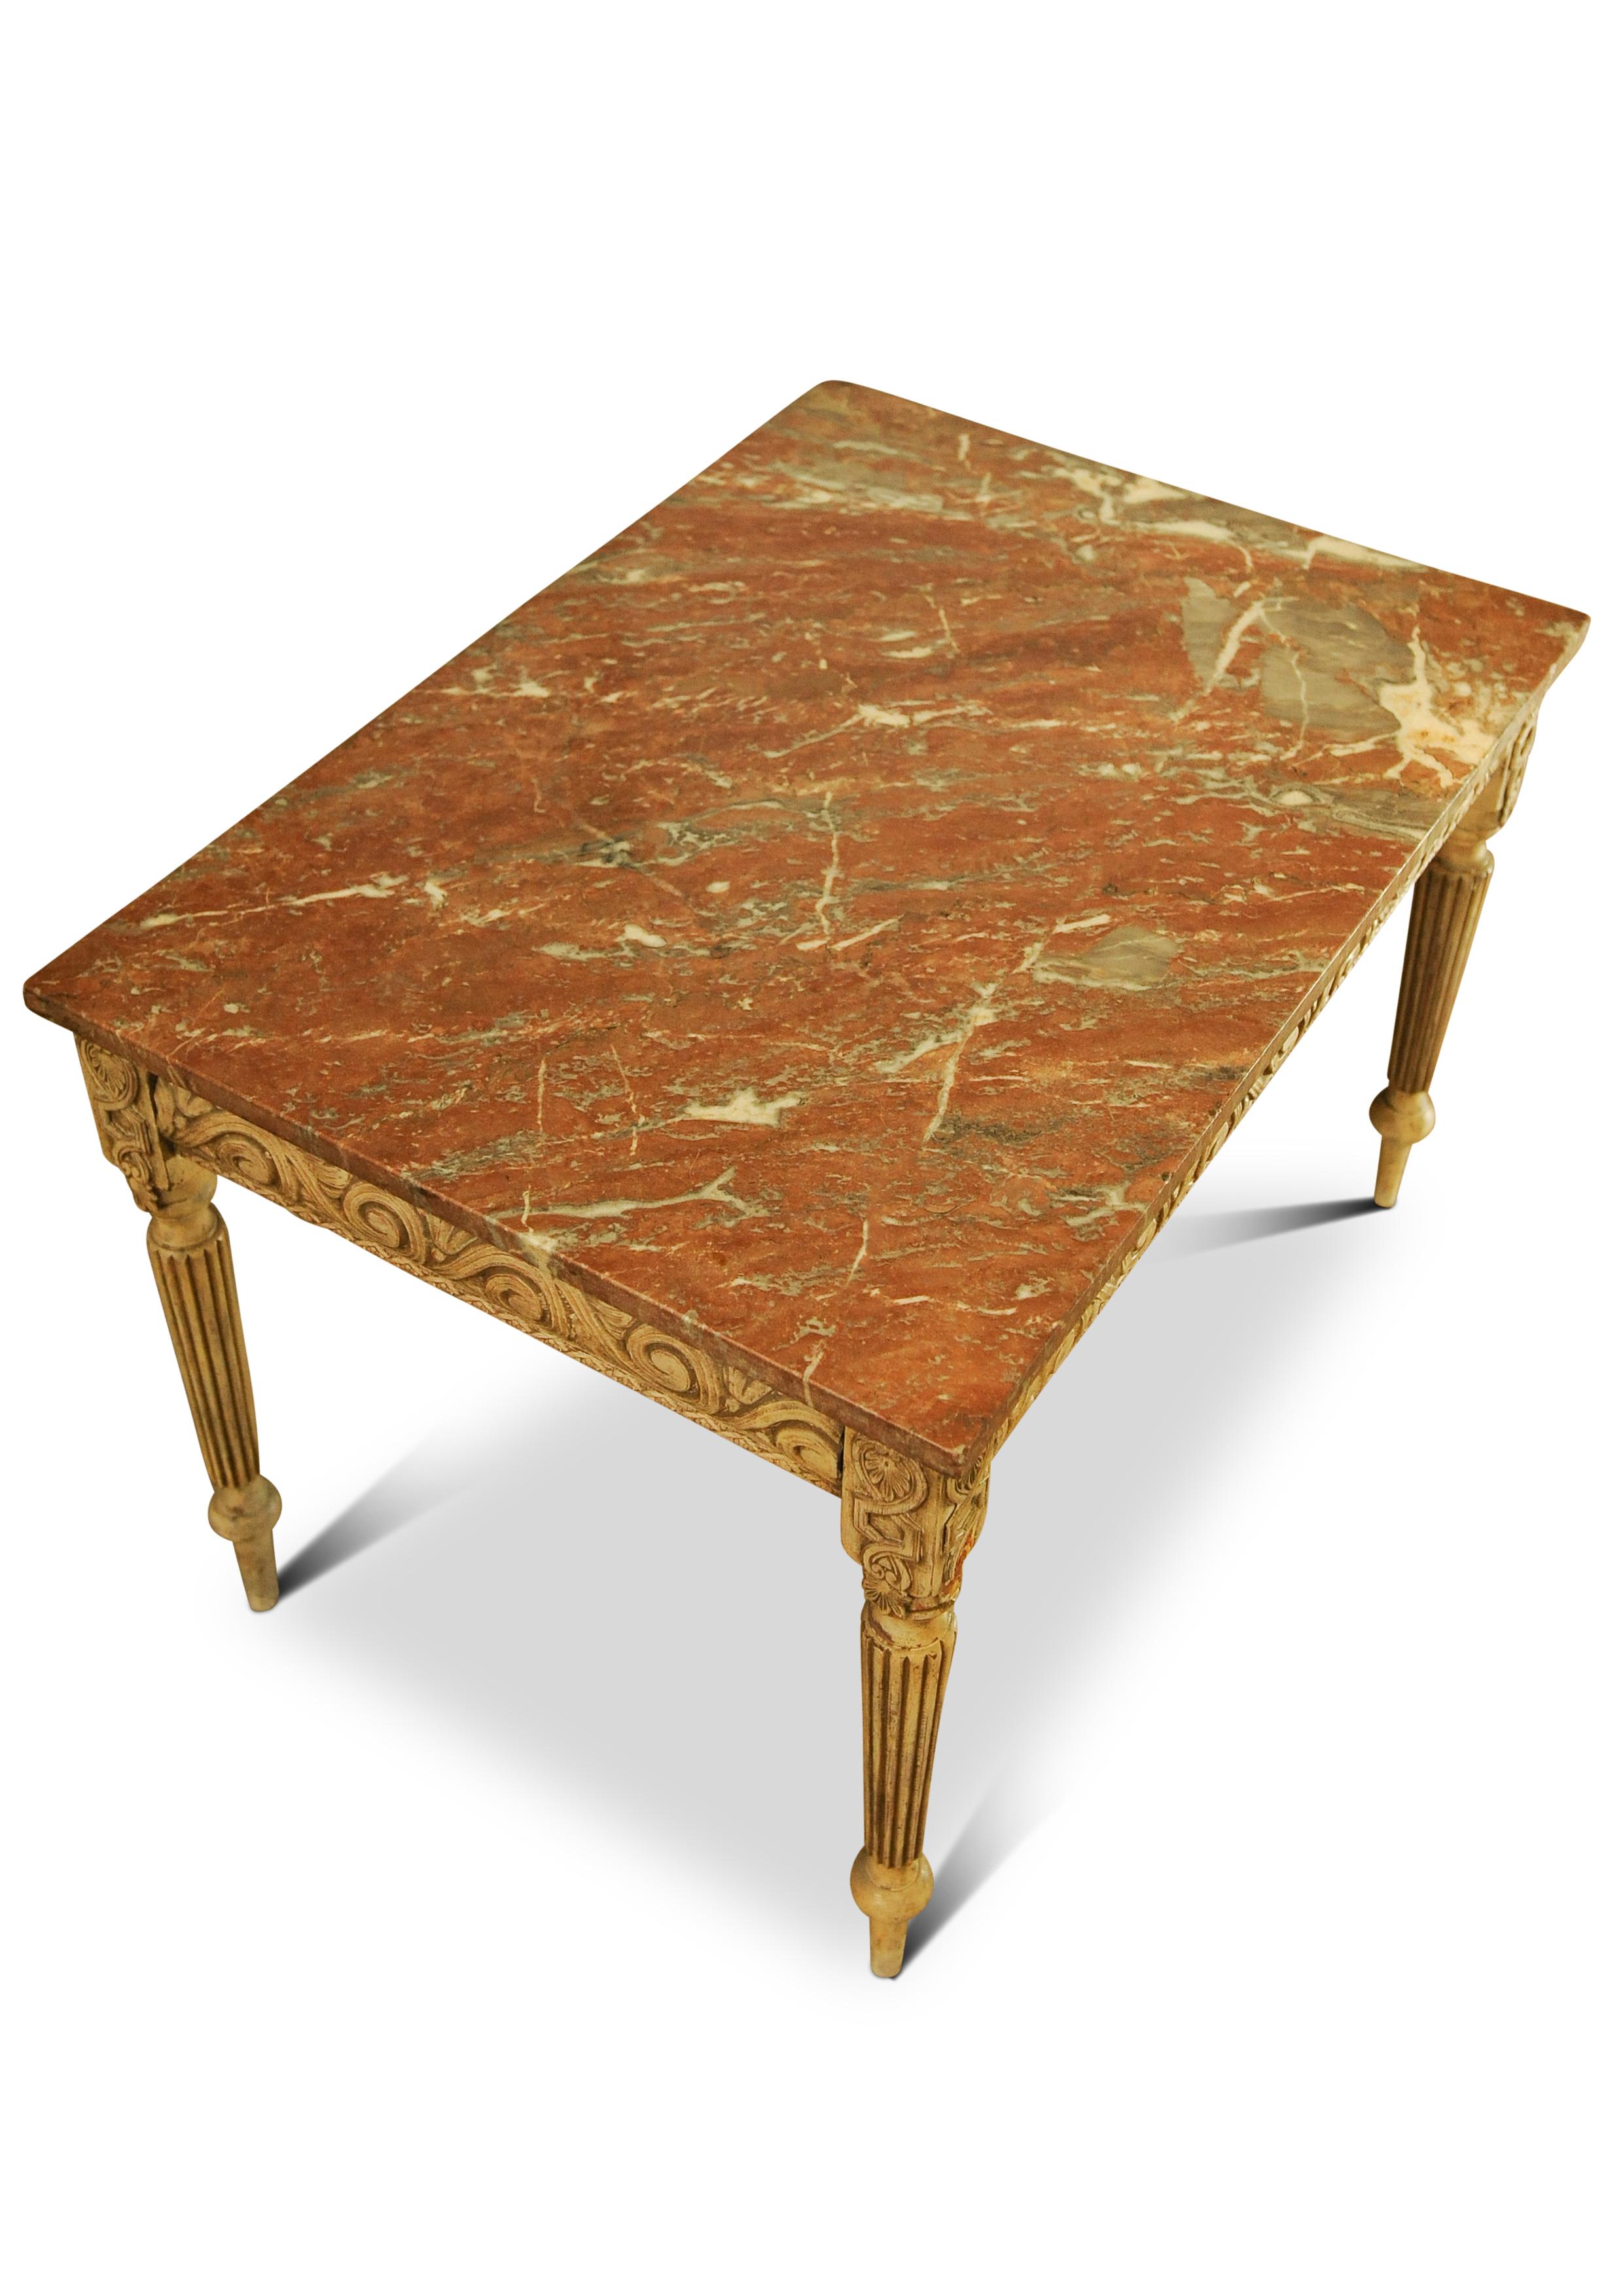 Louis XVI Design Rouge Veined Marble Top Decorative Painted Side Table Raised on fluted legs 1800's

Marble can be removed from table base.